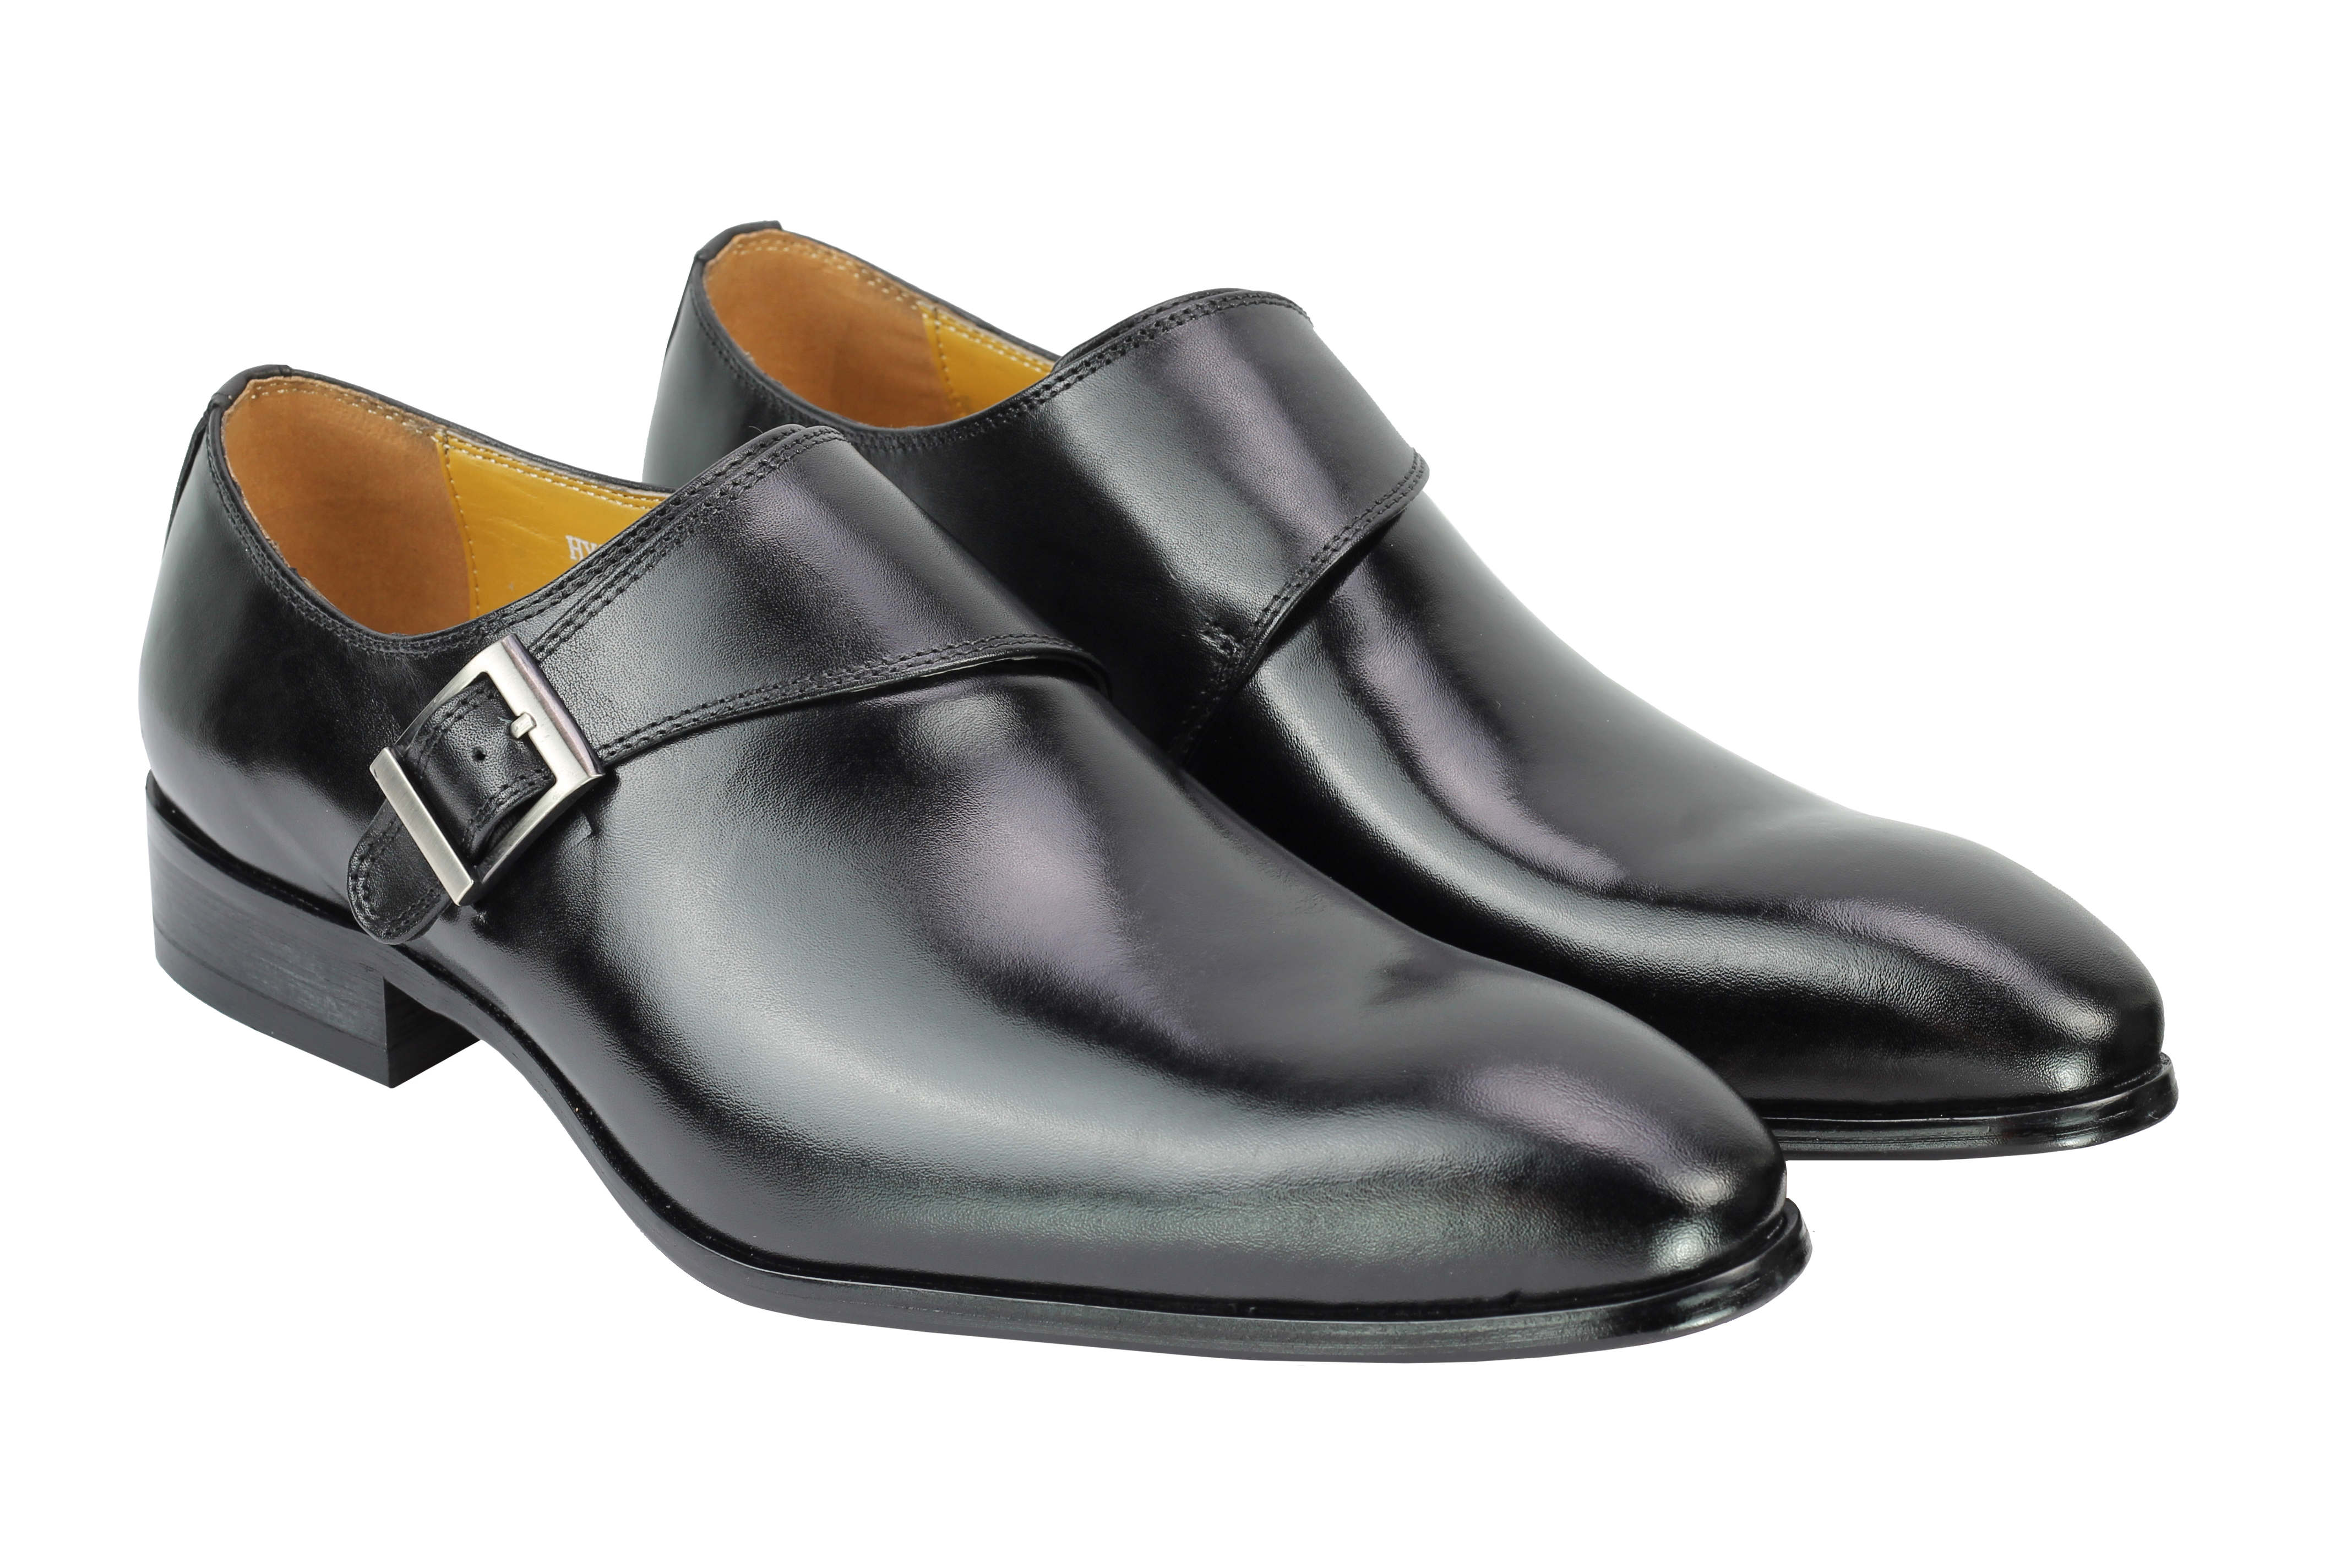 Real Leather Buckle Strap Slip Loafers Black